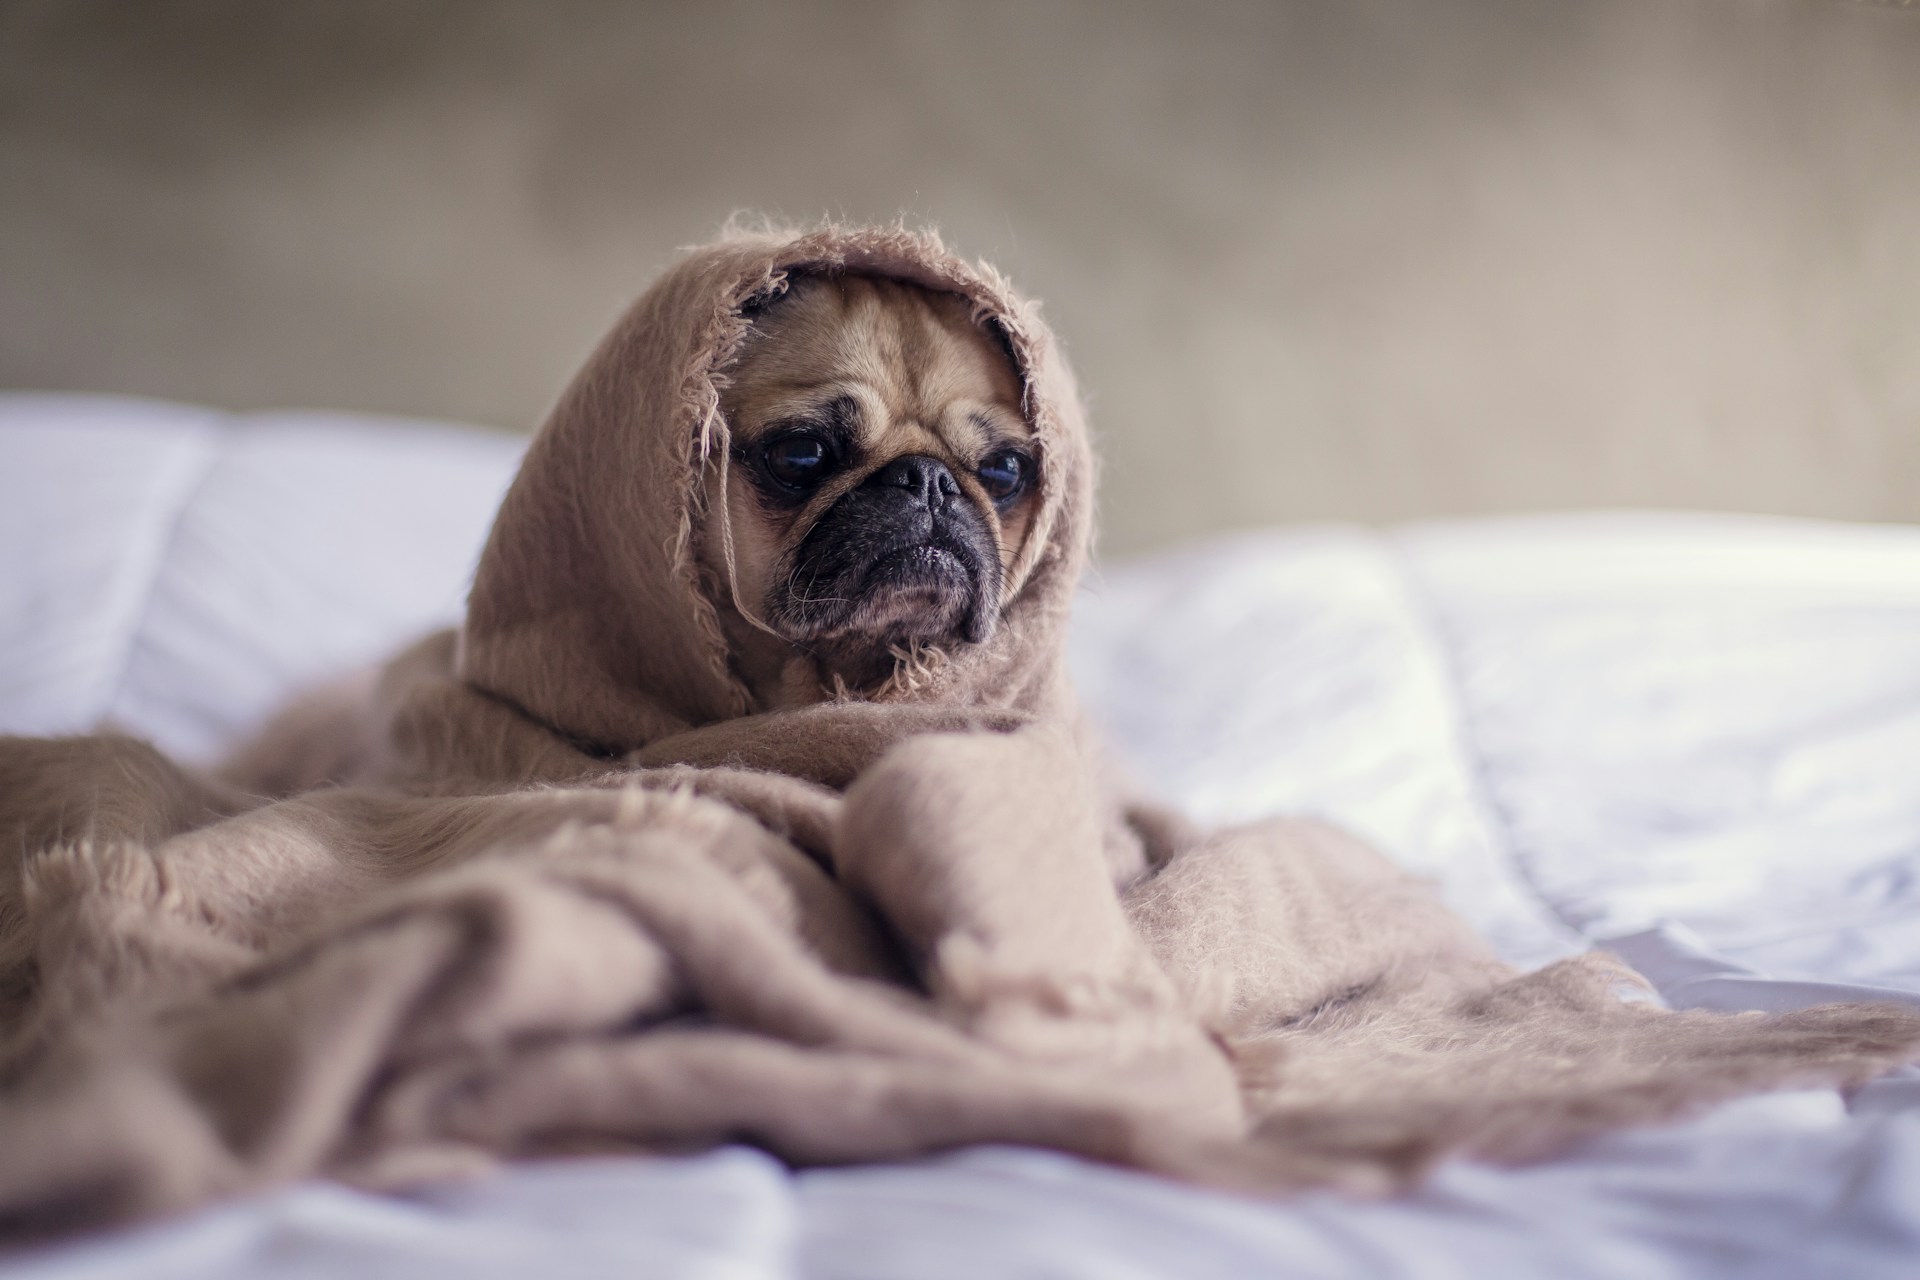 Photo of a pug dog, wrapped in a tattered blanket with only their sad little face exposed. They look like they are experiencing deep existential malaise.